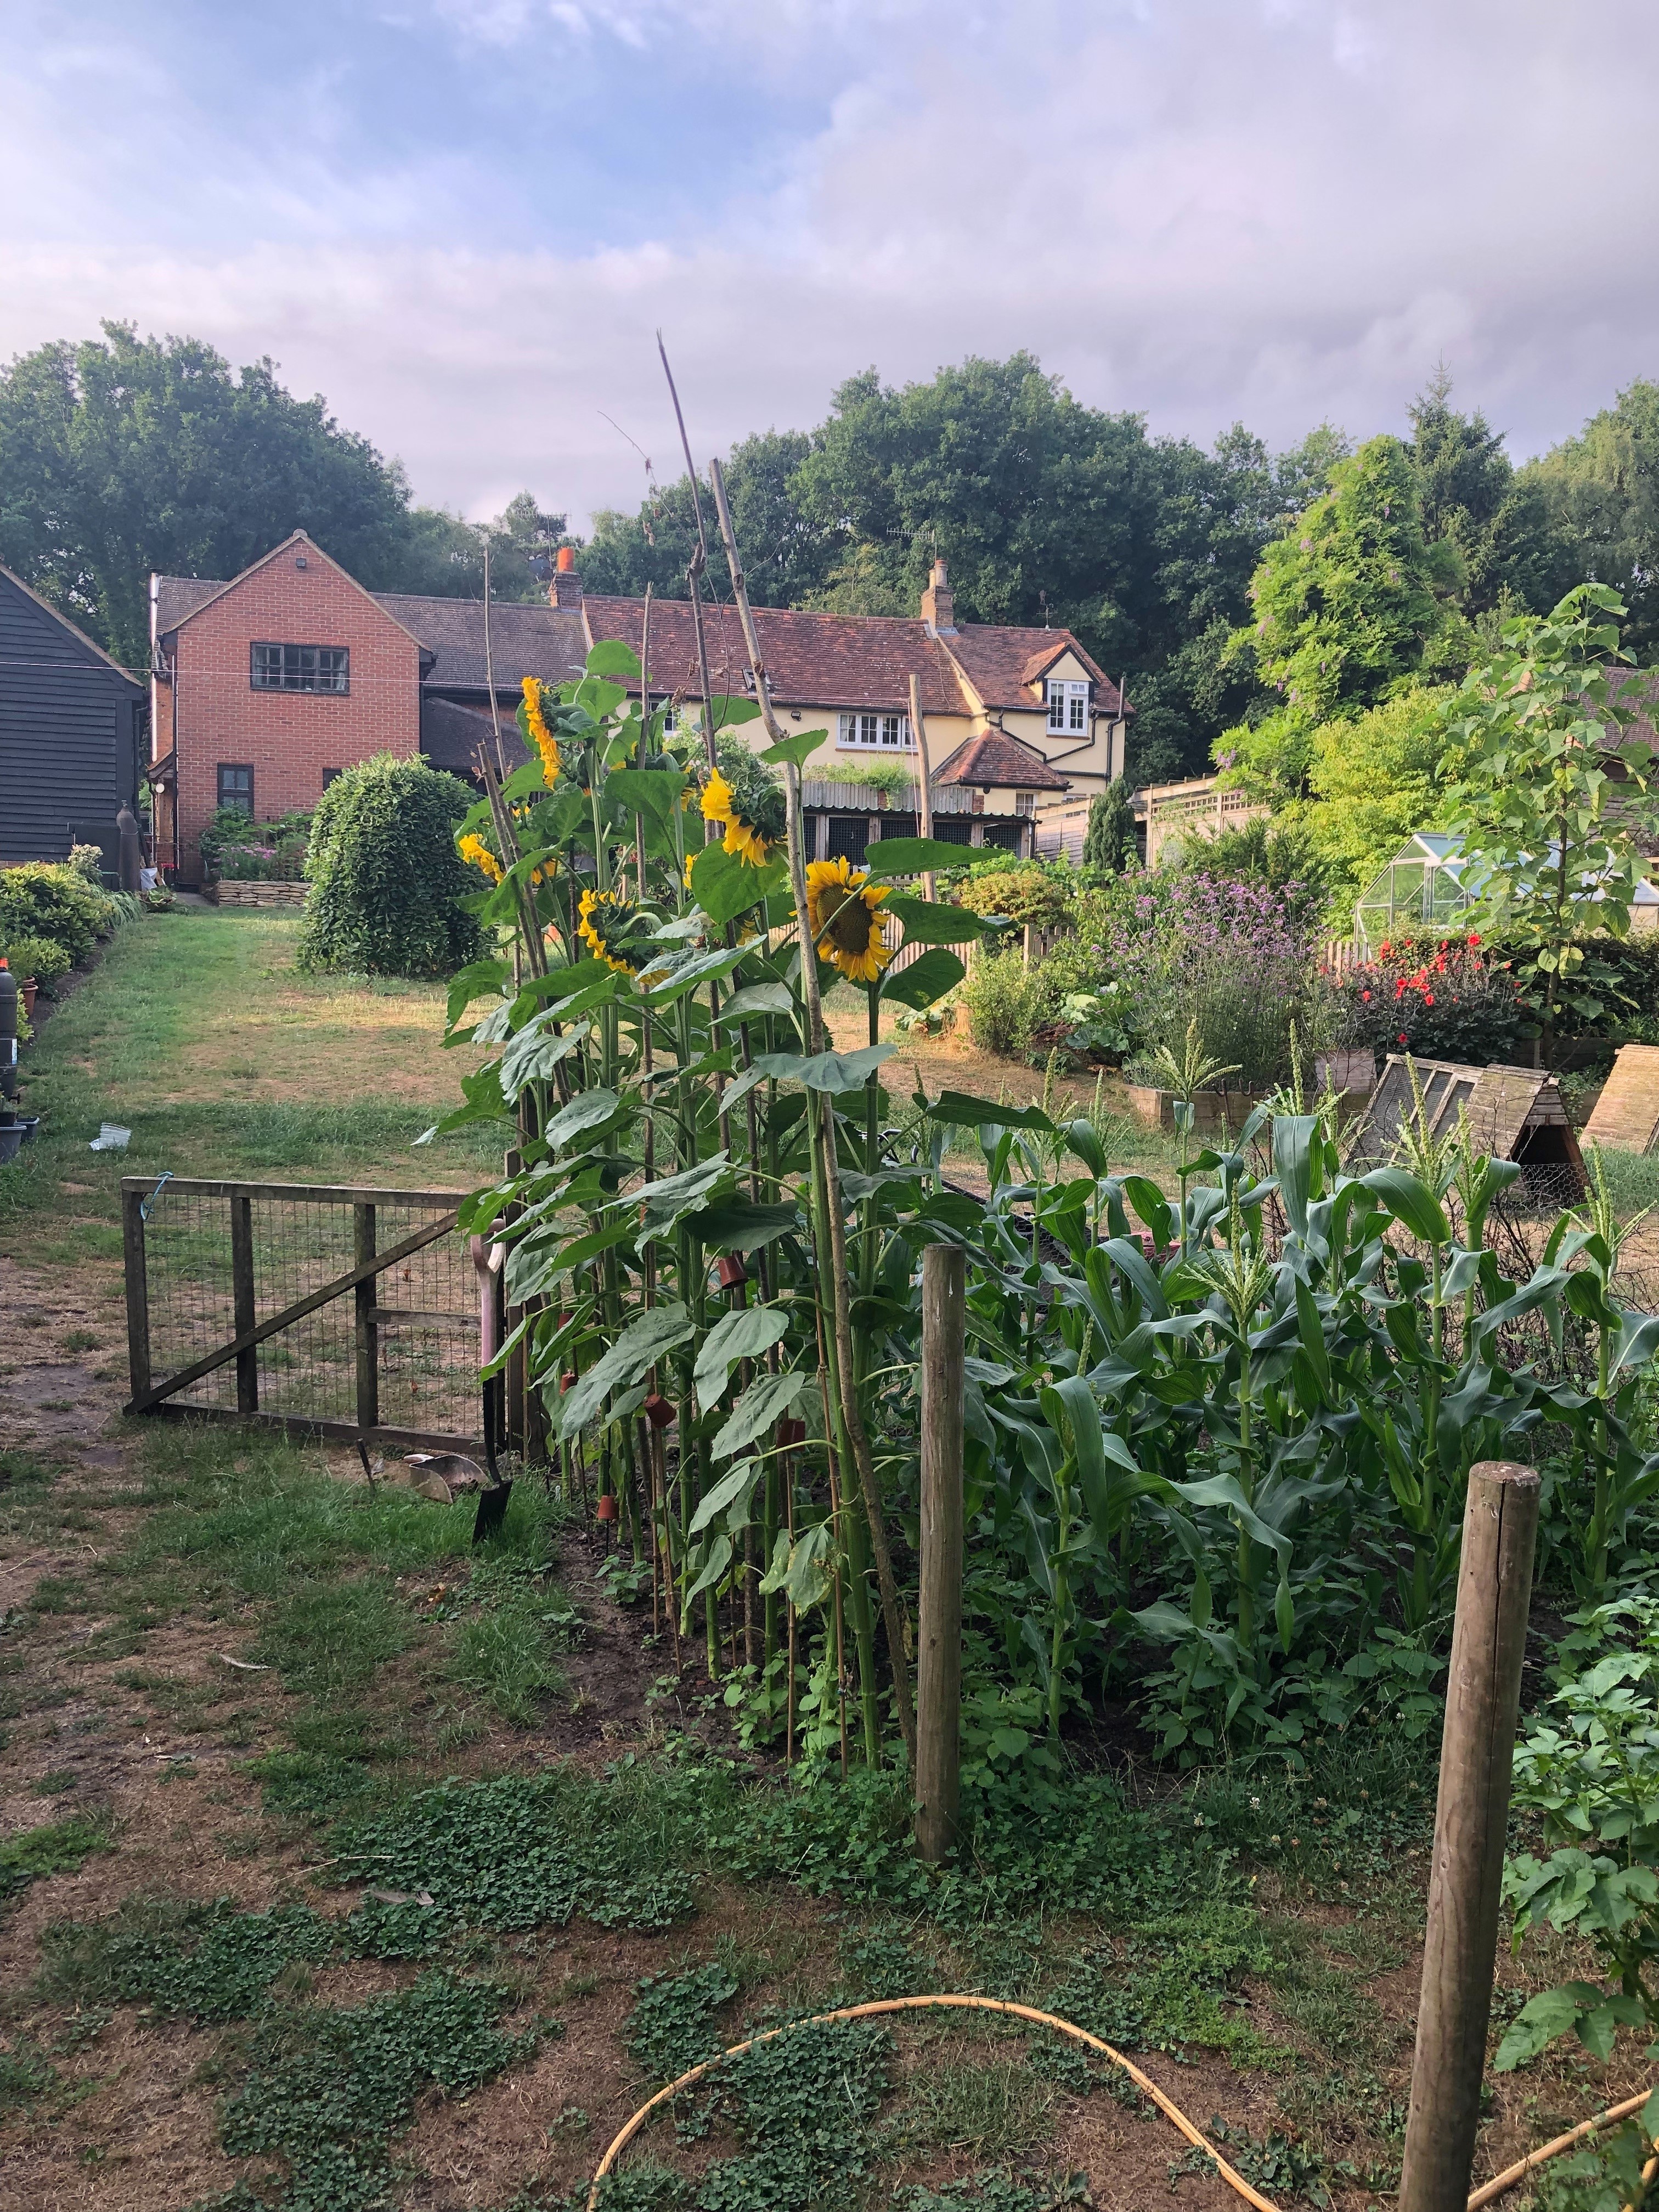 Sonia H - we have really enjoyed growing our sunflowers